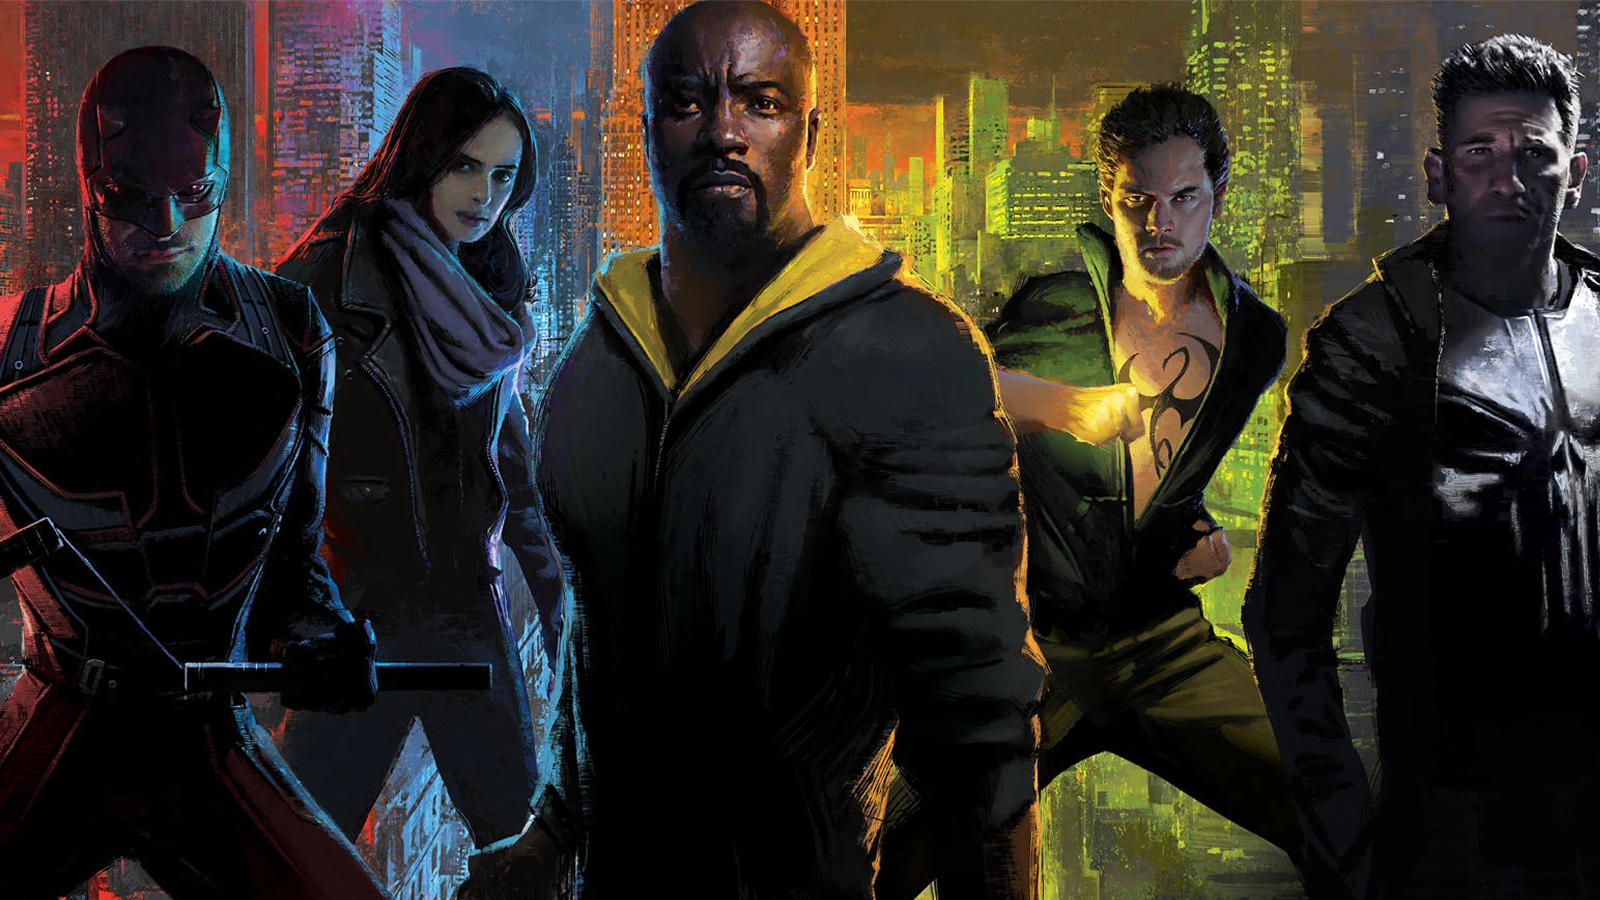 Key art for the Defenders featuring Daredevil, Jessica Jones, Luke Cage, Iron Fist, and the Punisher.